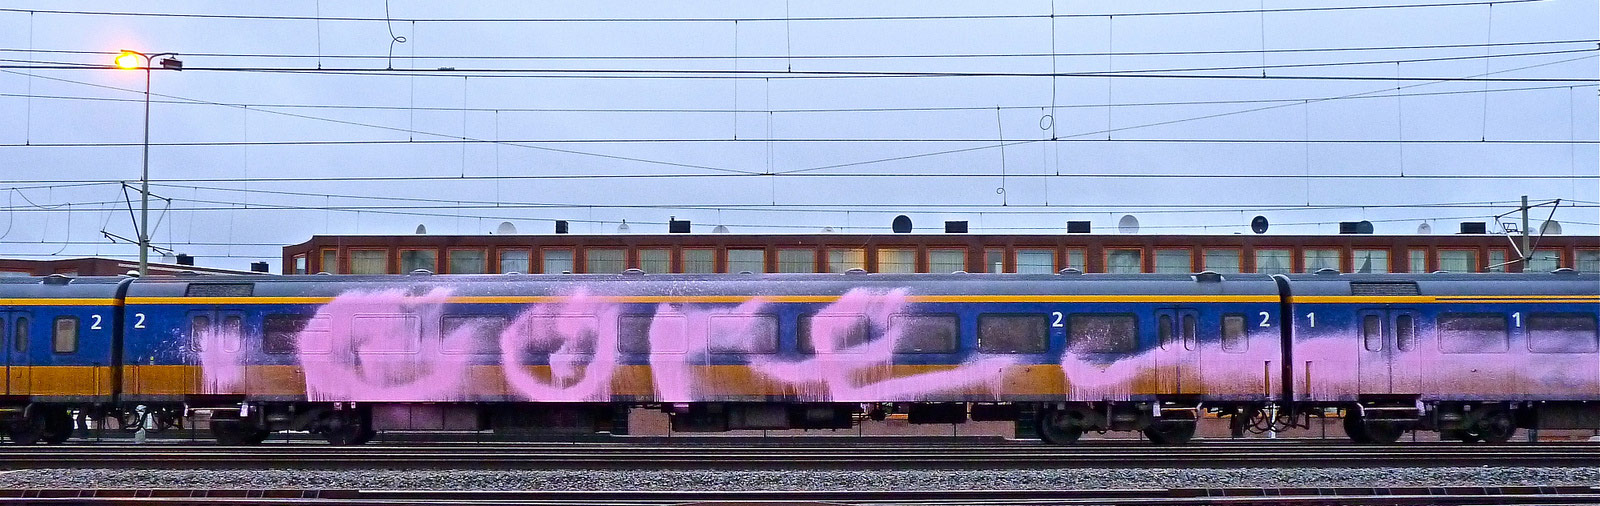 pink netherlands train wholecar gore hague fire-extinguisher fall13